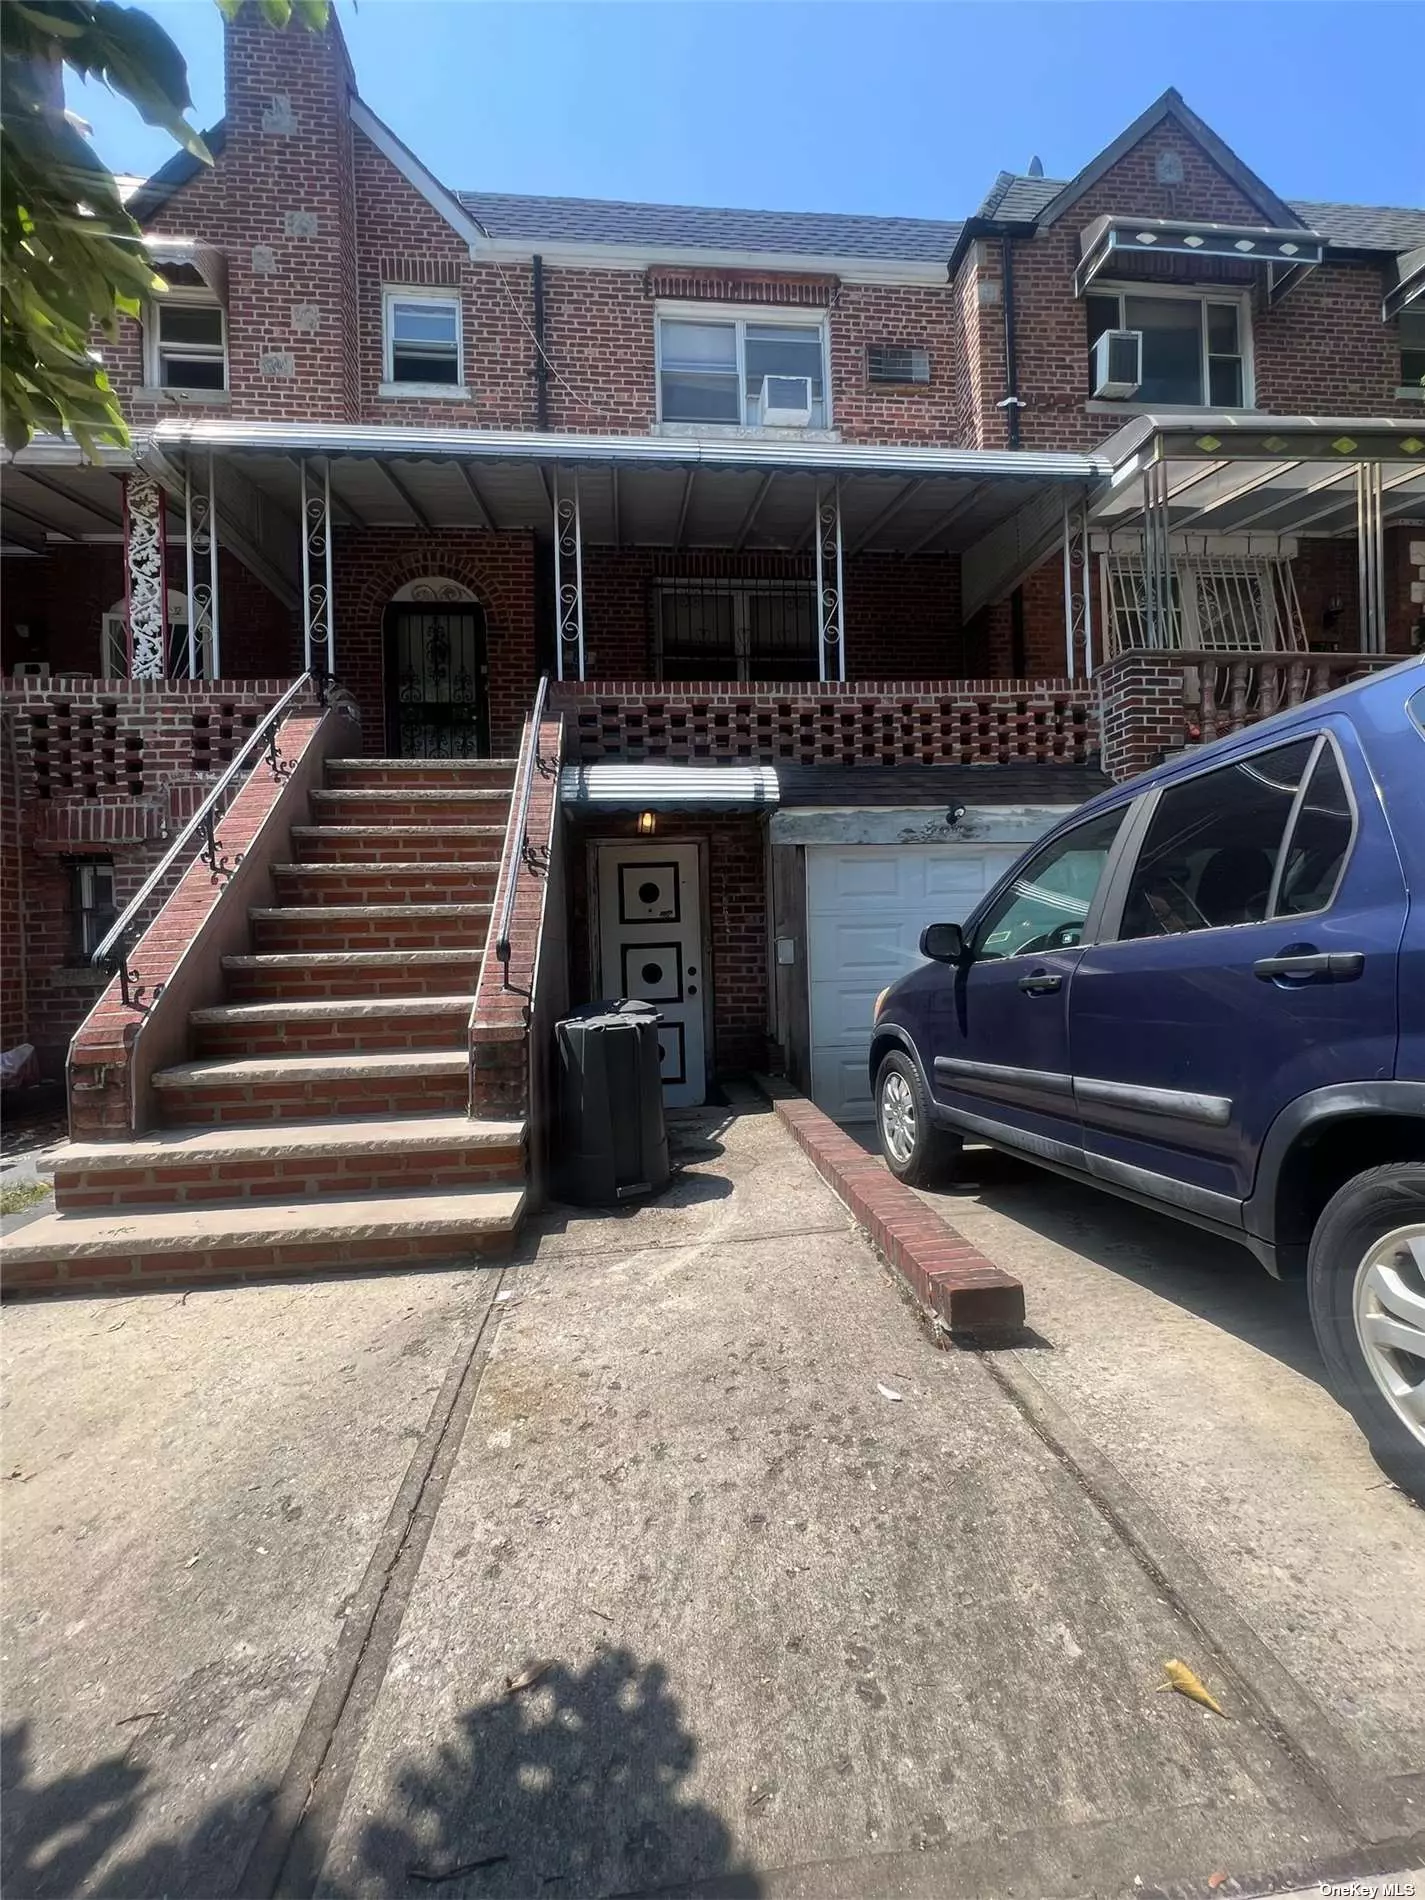 Welcome home to this 2 family brick house in the heart of East Flatbush. This home features 3 bedrooms, a spacious living room featuring beautiful gleaming hardwood floors, dining room, 2 kitchens, 2 bathrooms, full finished basement apartment with private entrance / walk-out and backyard space for entertaining; attached car garage.